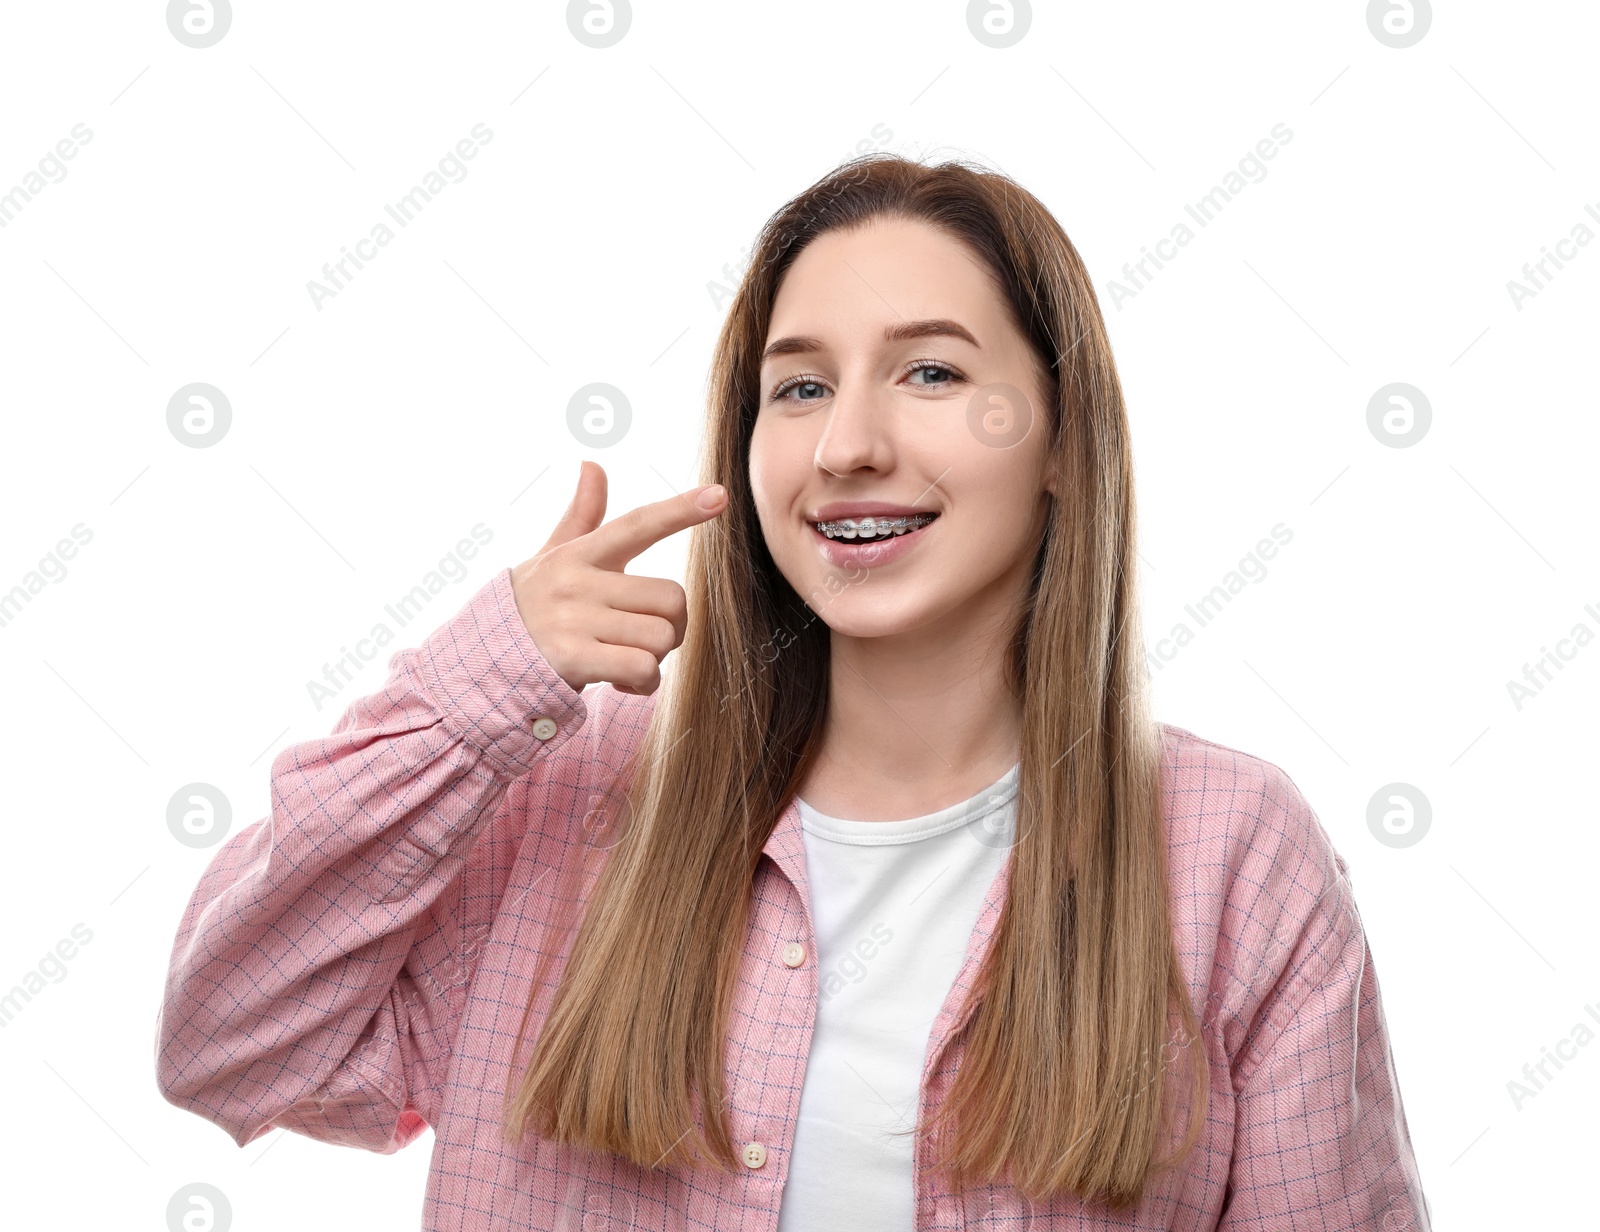 Photo of Portrait of smiling woman pointing at her dental braces on white background